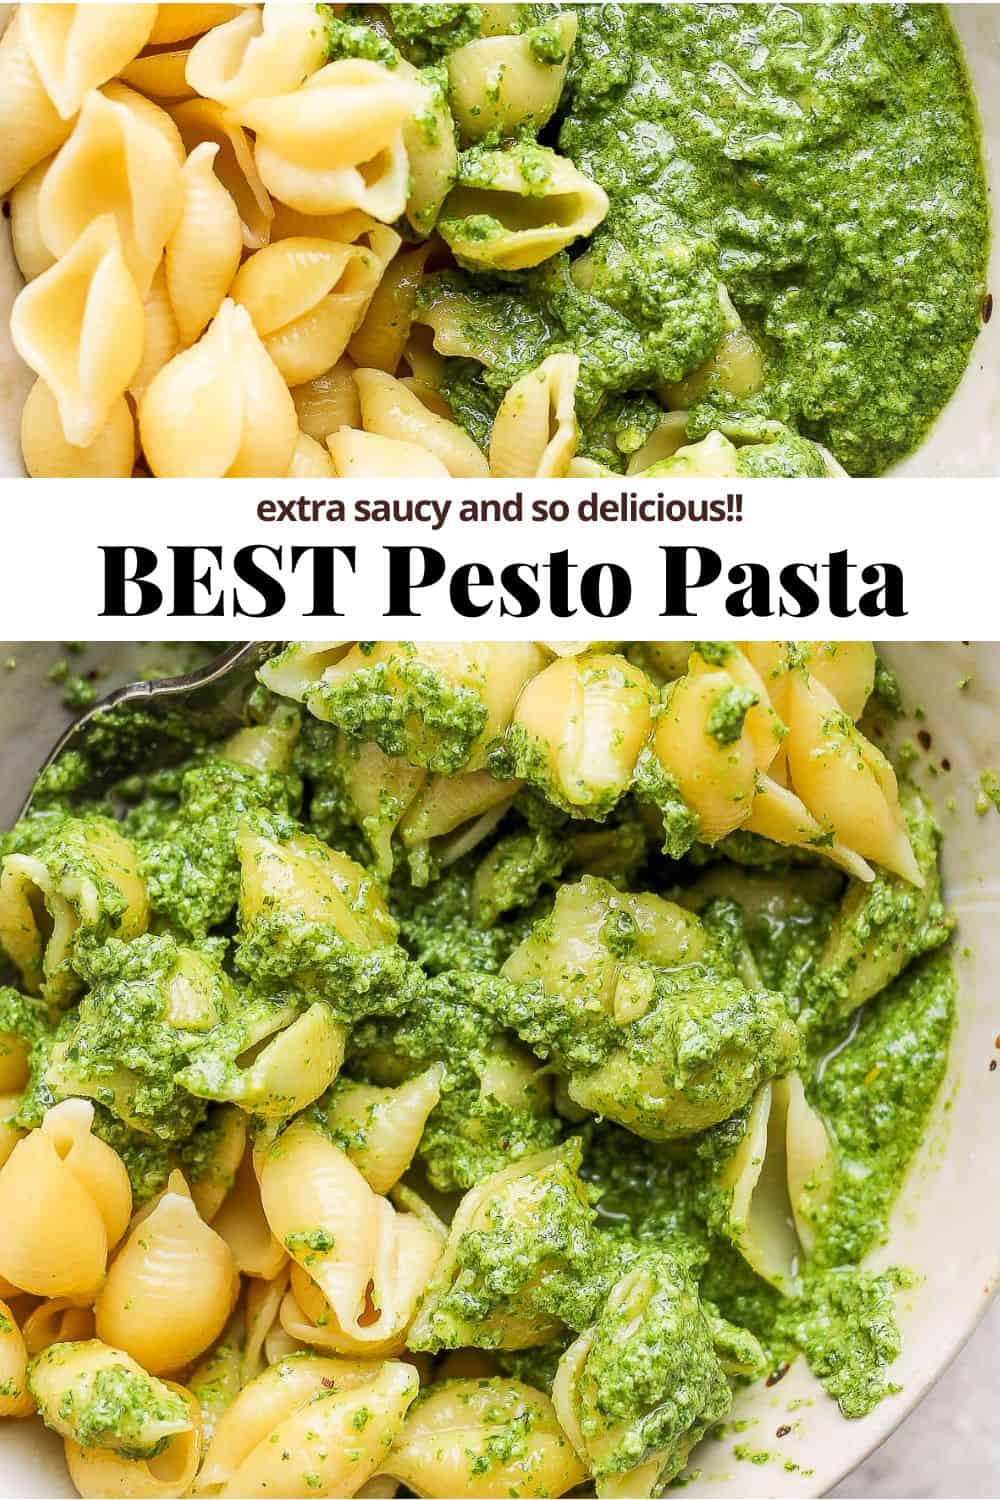 Pinterest image showing basil pesto pasta with the title "extra saucy and so delicious!! Best pesto pasta."